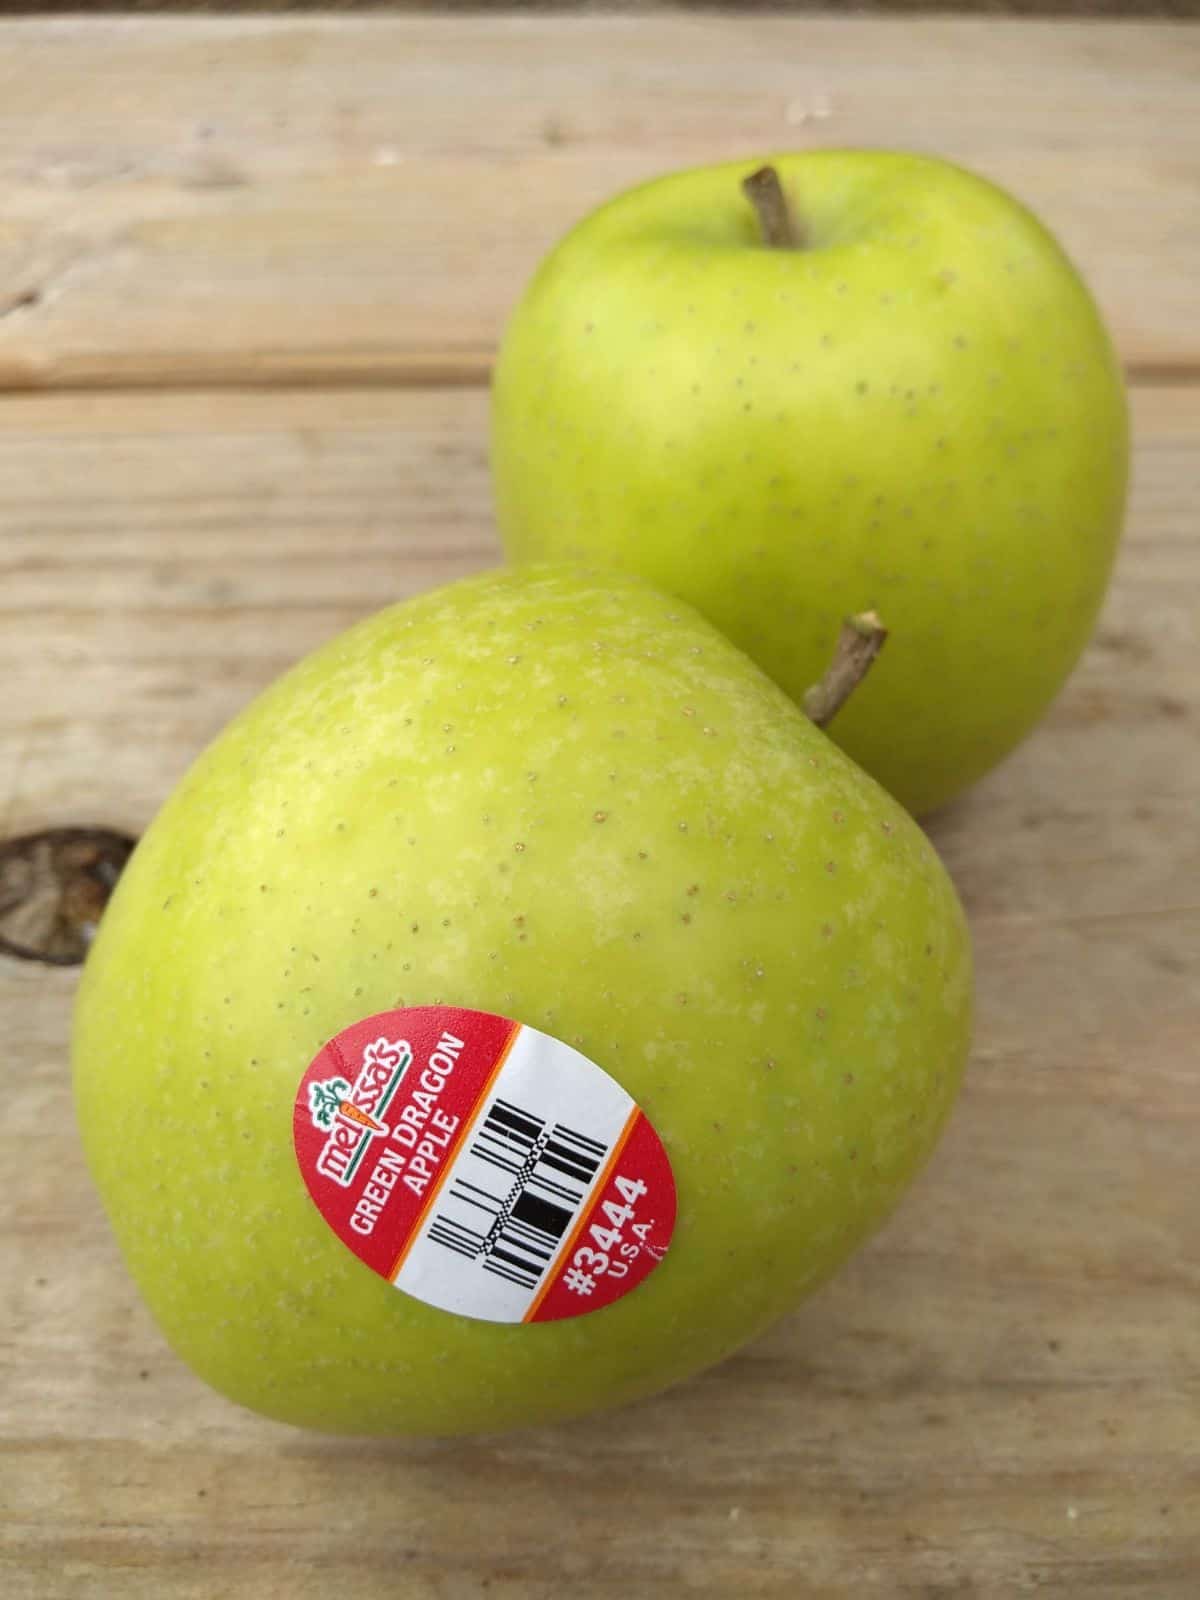 A close up on a table of two Green Dragon apples with a Melissa's PLU sticker on them.